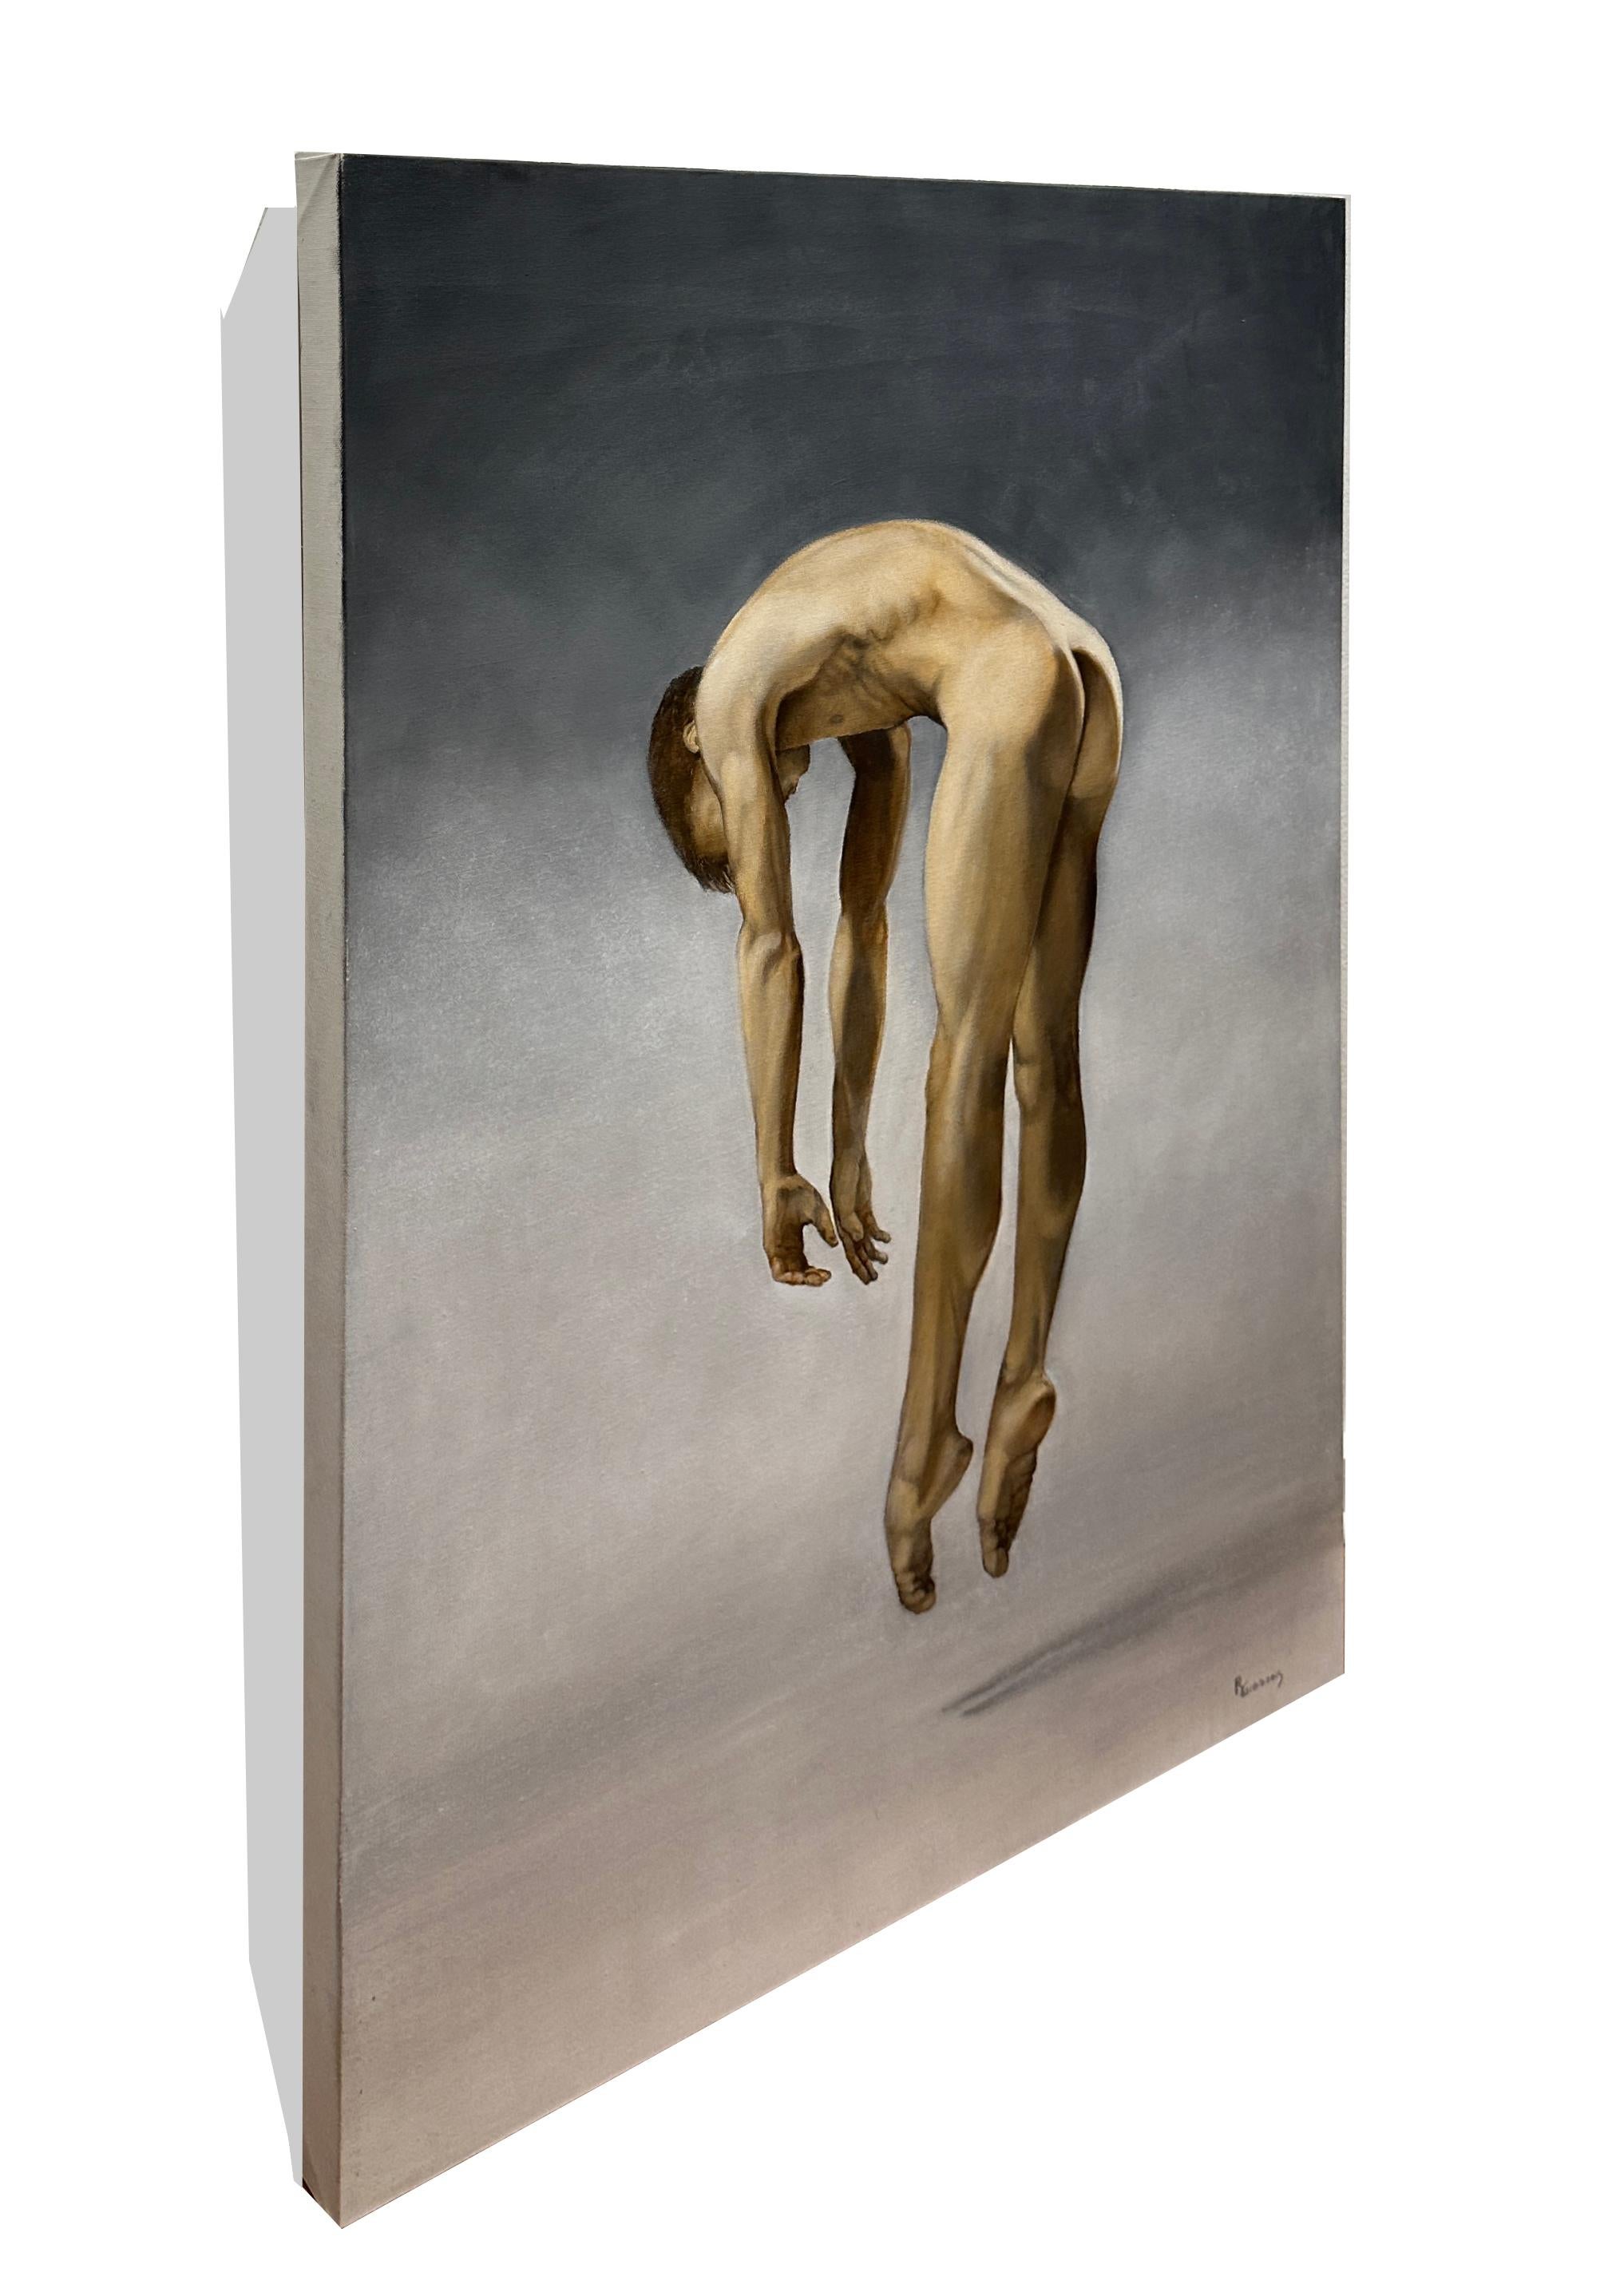 Hover - Male Nude Suspended in Air, Side View, Original Oil on Canvas - Contemporary Painting by Richard Gibbons